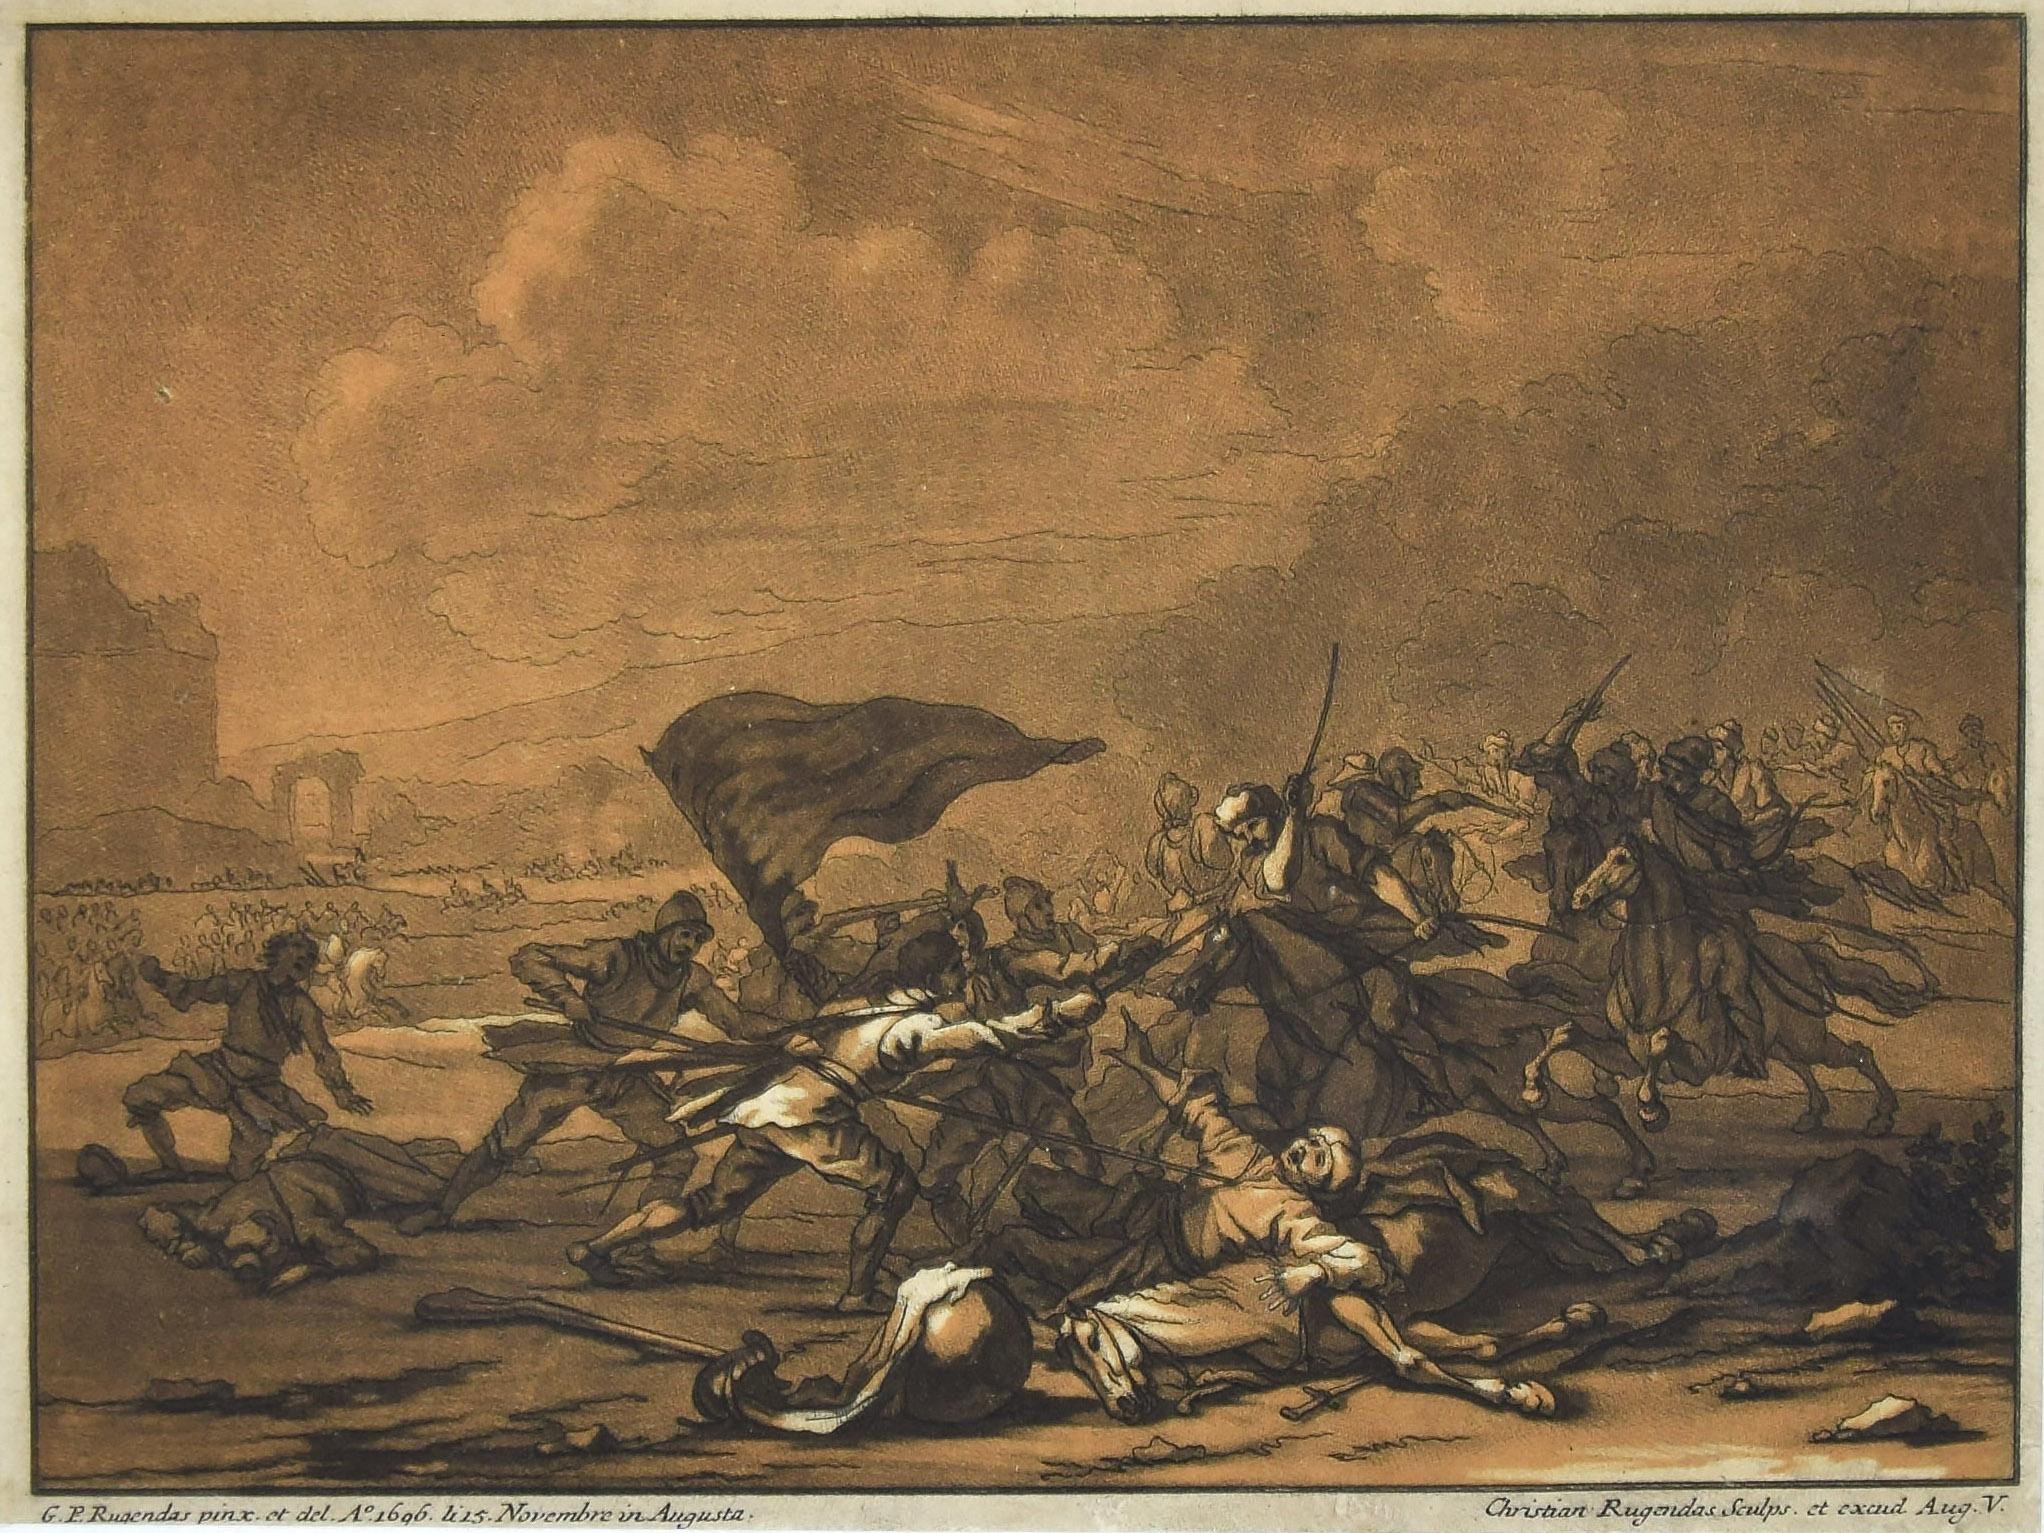 Battle Scene is an etching artwork realized by Johan Christian Rugendas (1706-1781). Edition d'Apres George Philip Rugendas (1606-1742).

Signed on the plate.

Good conditions and aged.

Included a Passepartout: 32 x 45 cm.

The artwork represents a